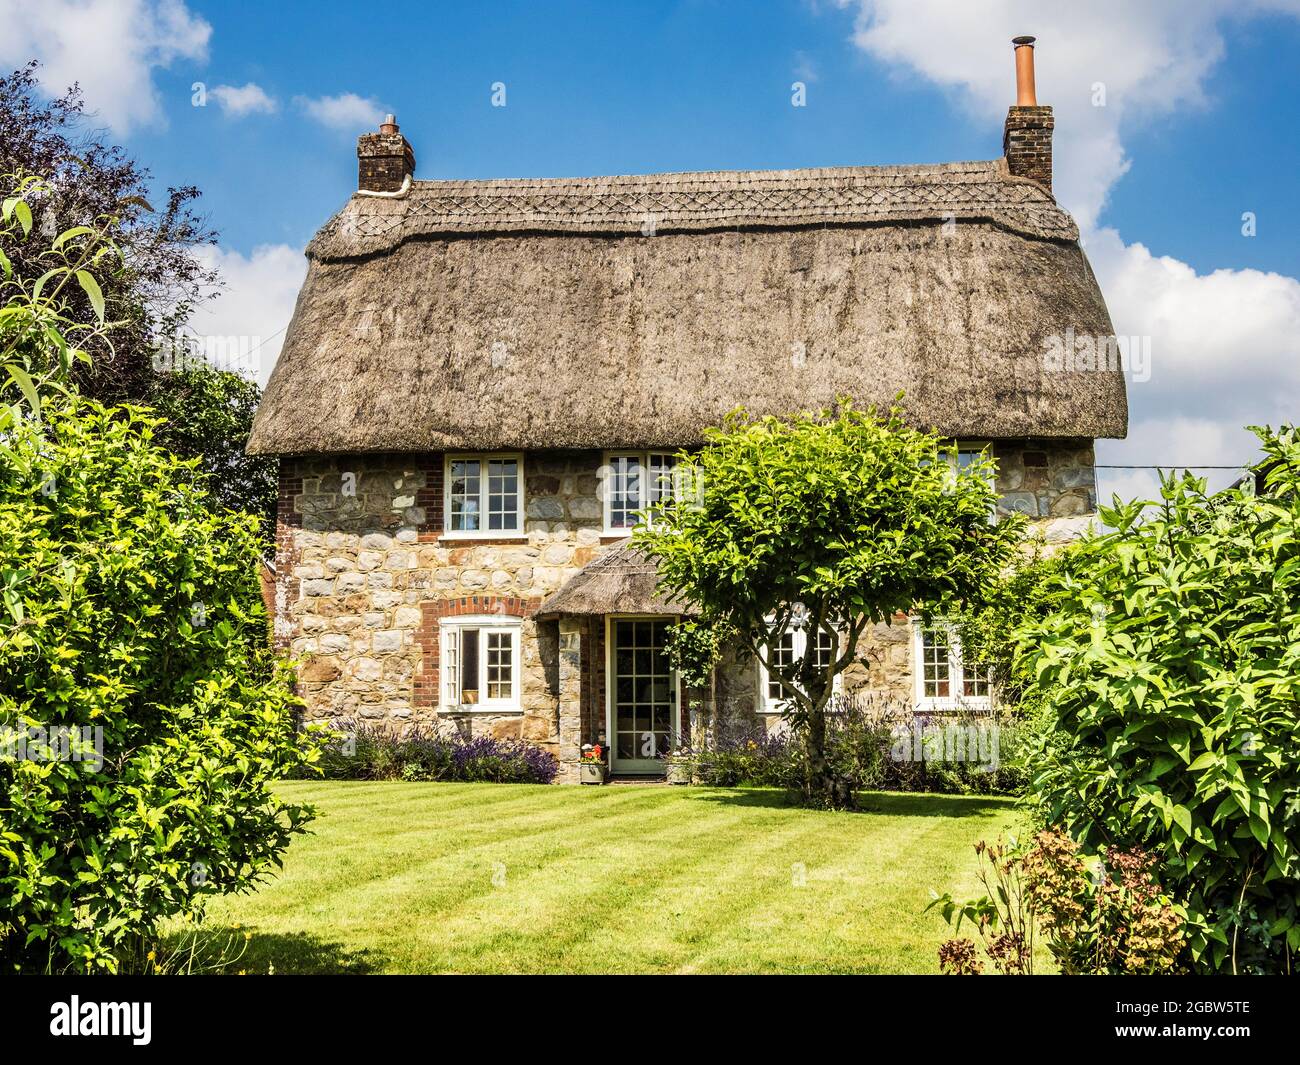 The picturesque thatched cottage in Wiltshire. Stock Photo